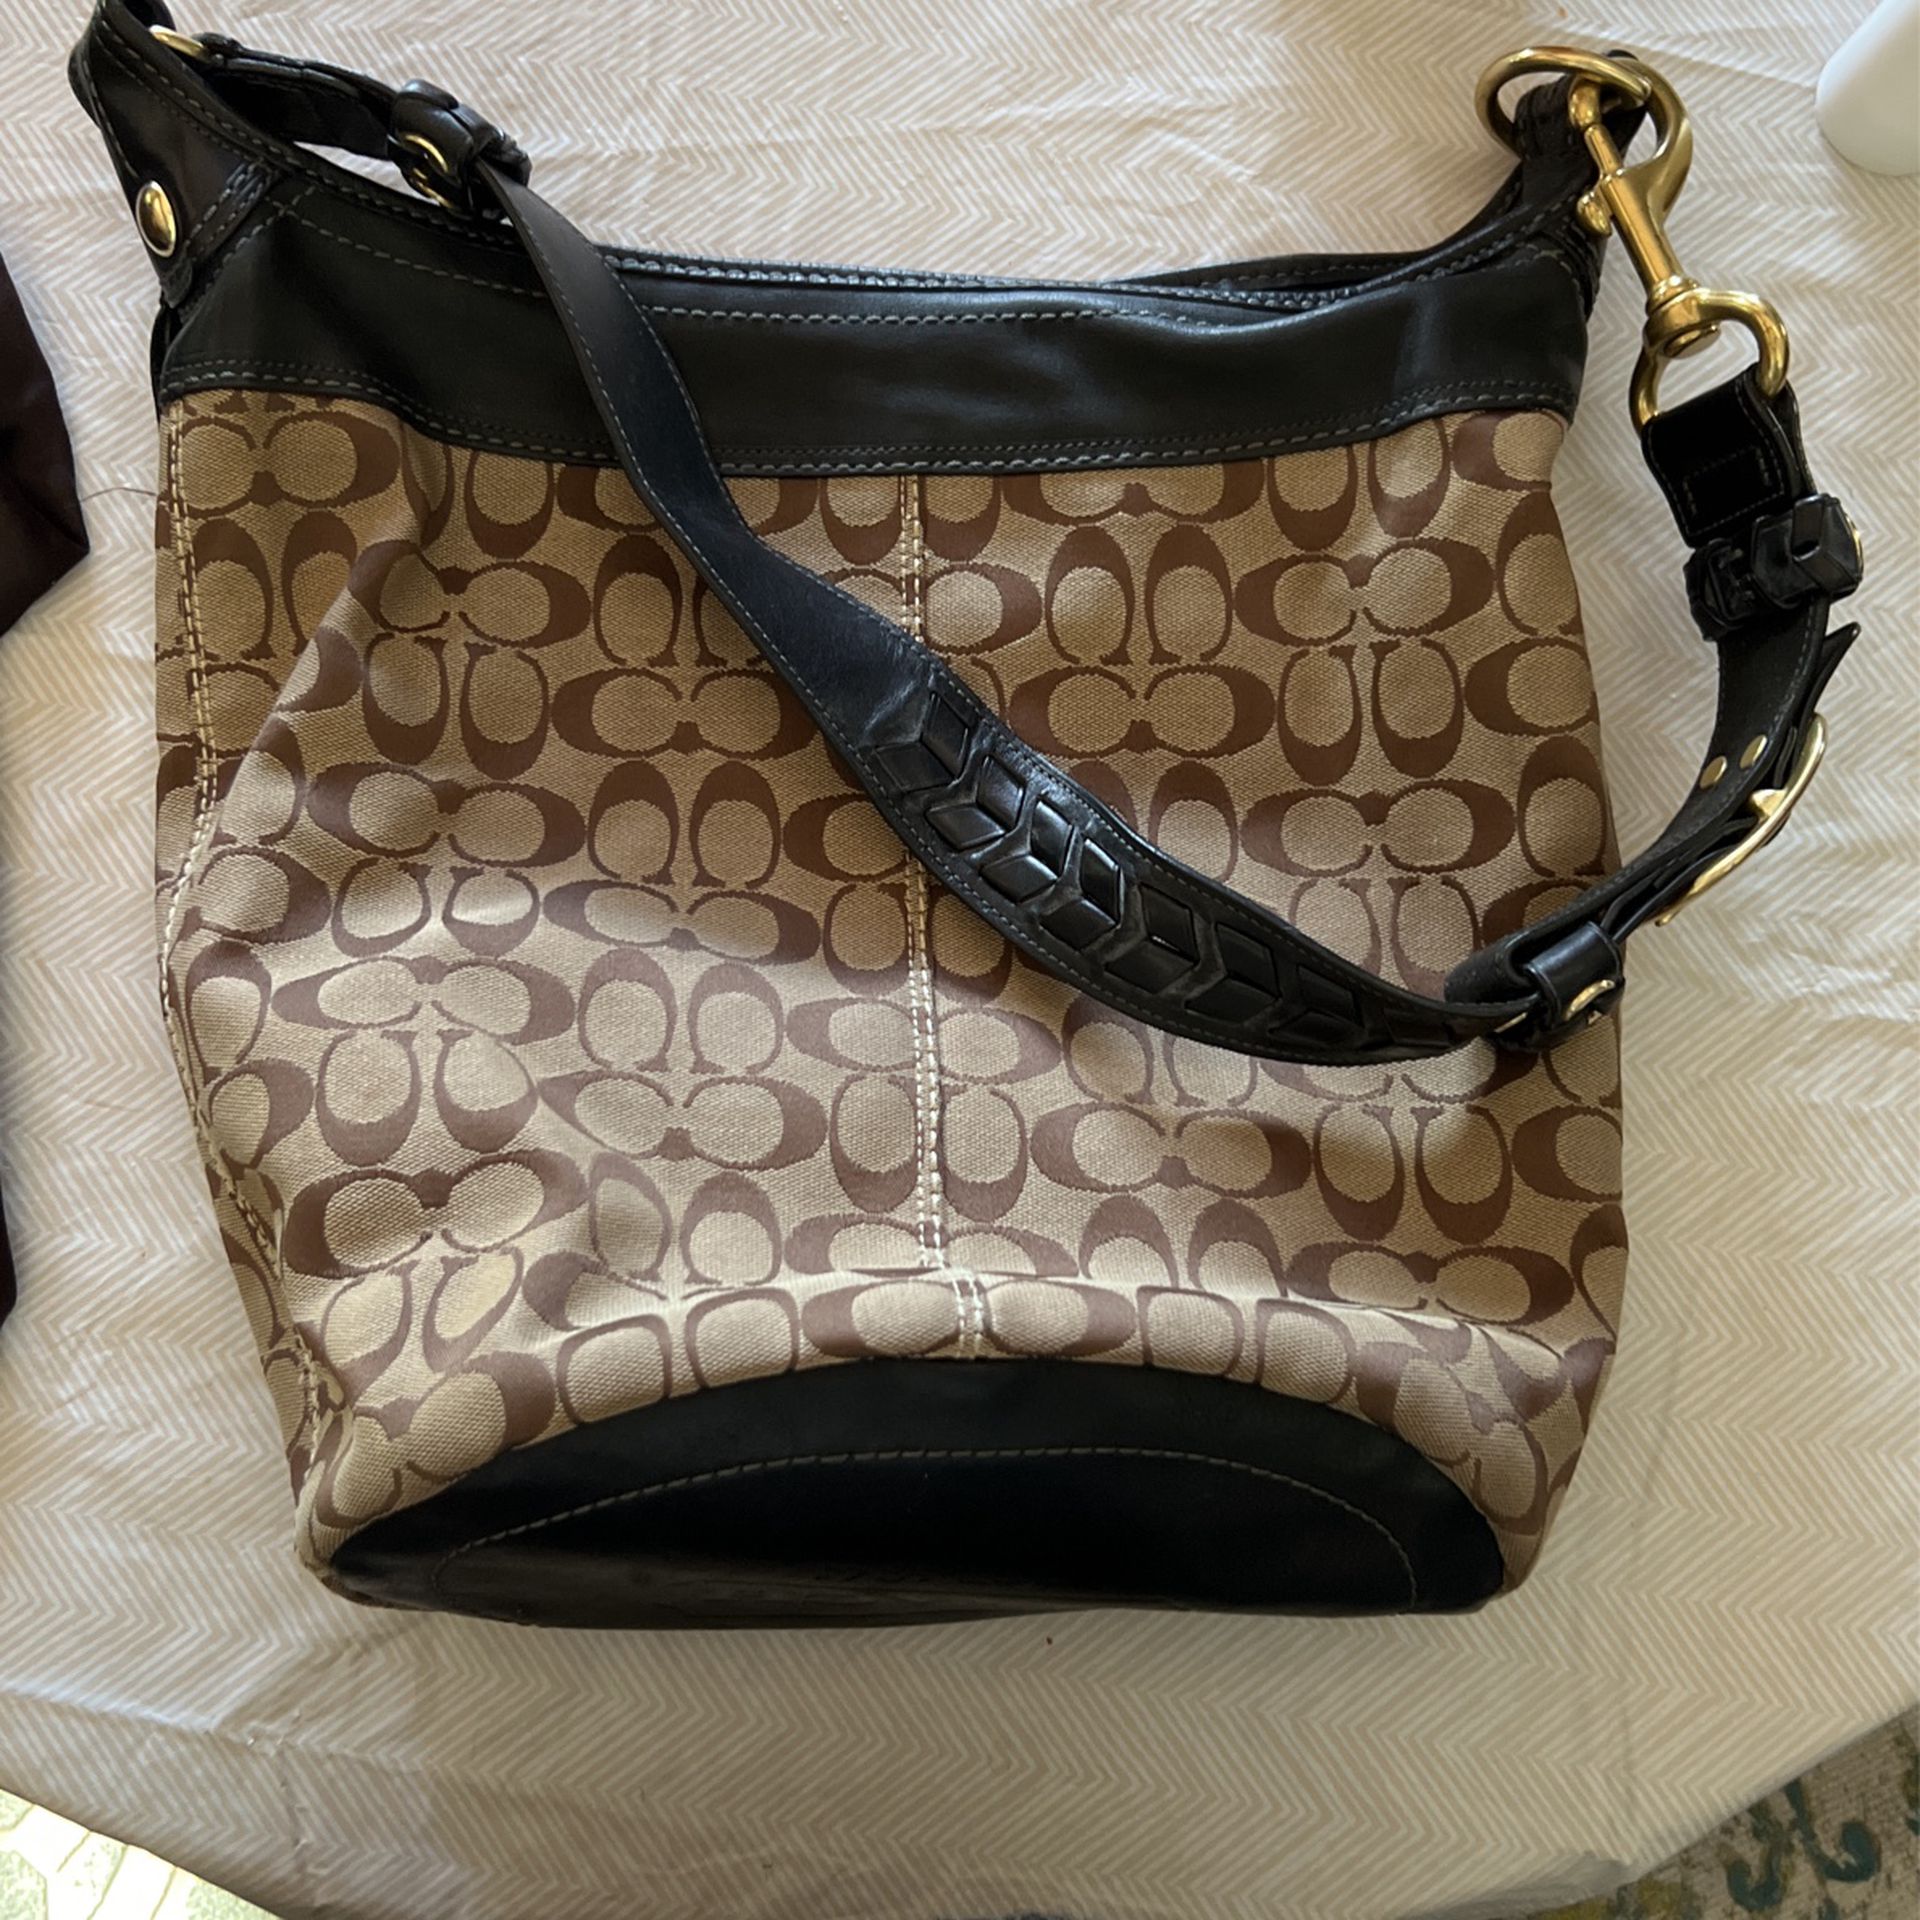 Coach Monogram Canvas and Black Leather Bag